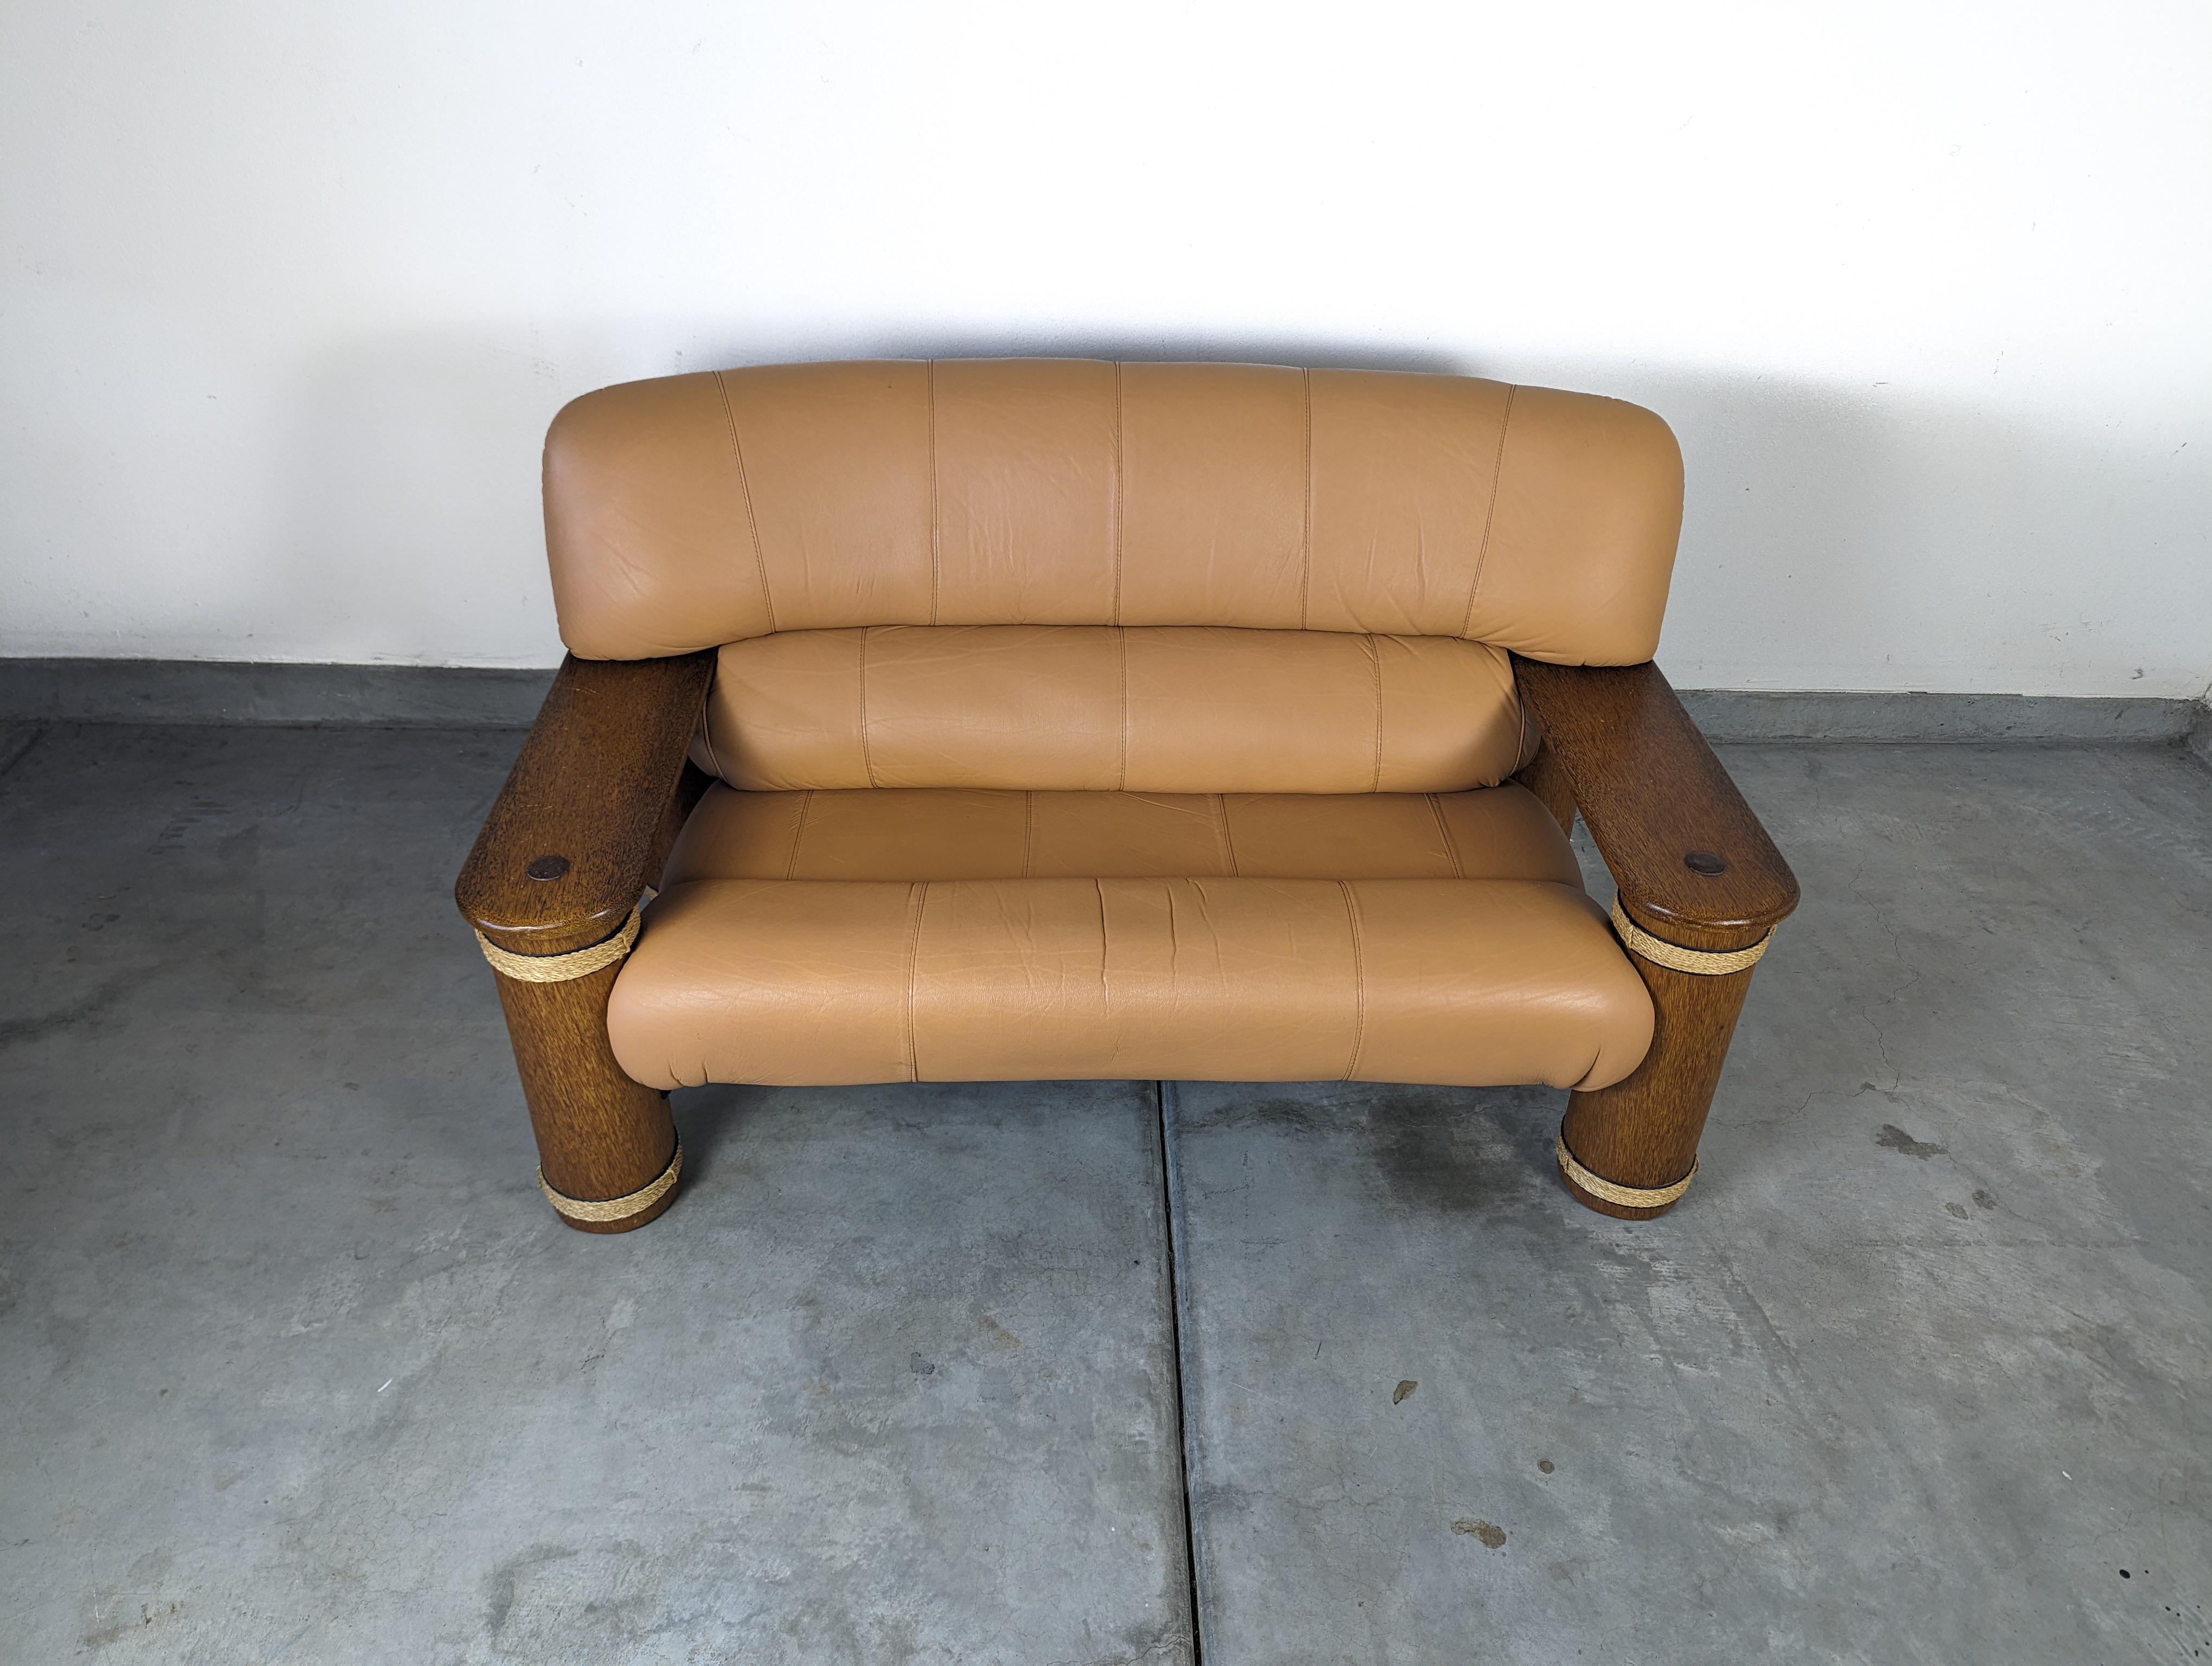 Vintage Leather and Palmwood Loveseat Sofa by Pacific Green, c1990s For Sale 2